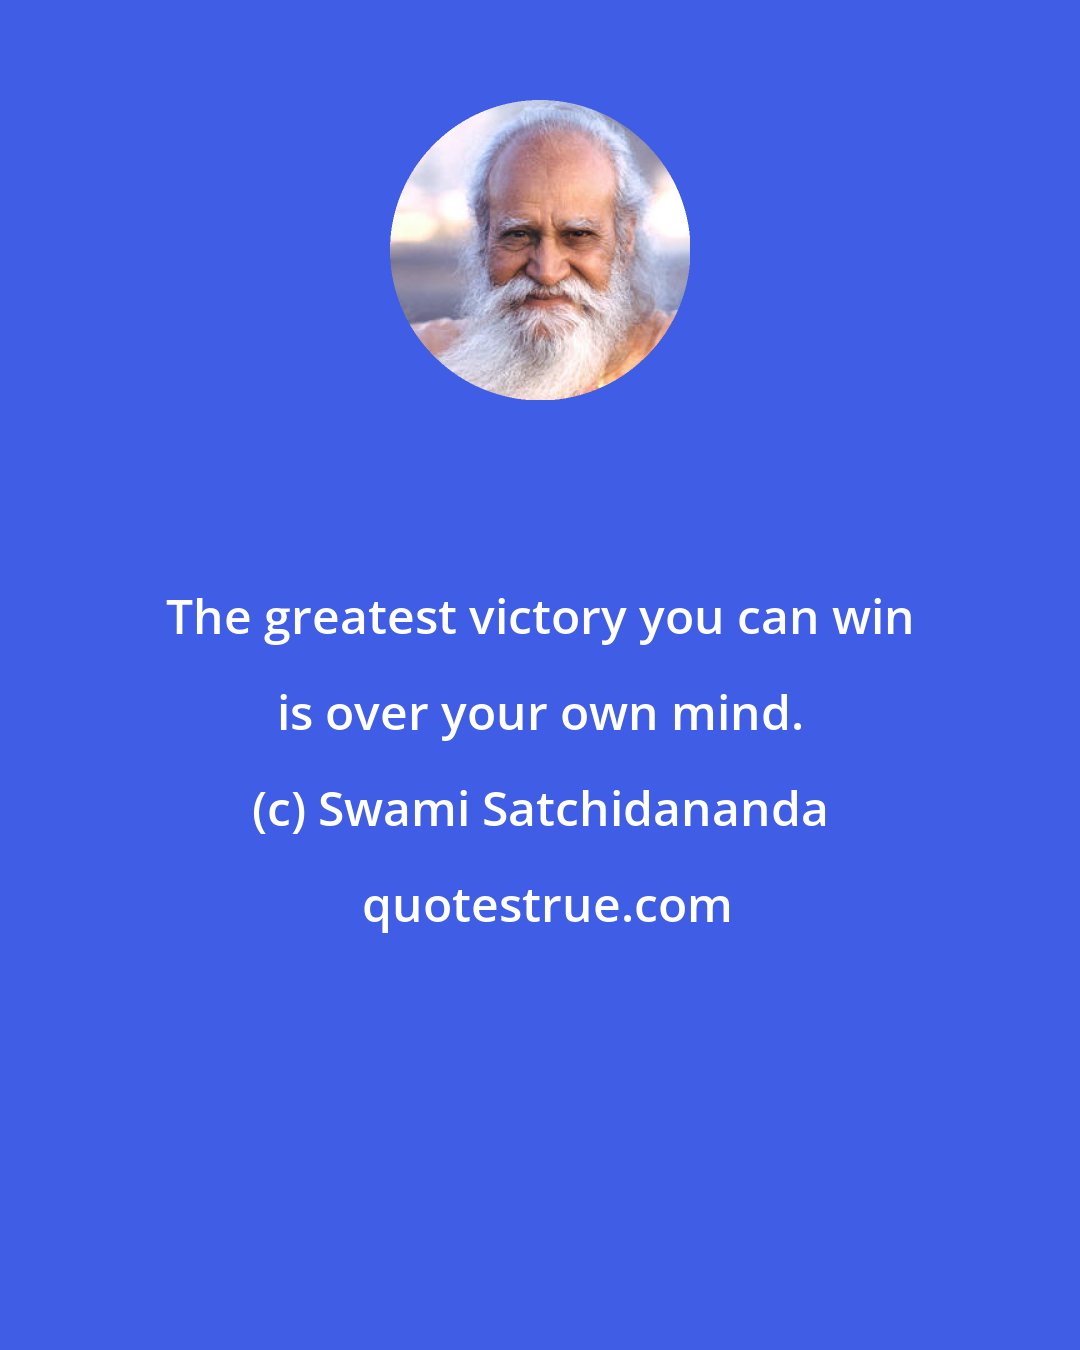 Swami Satchidananda: The greatest victory you can win is over your own mind.